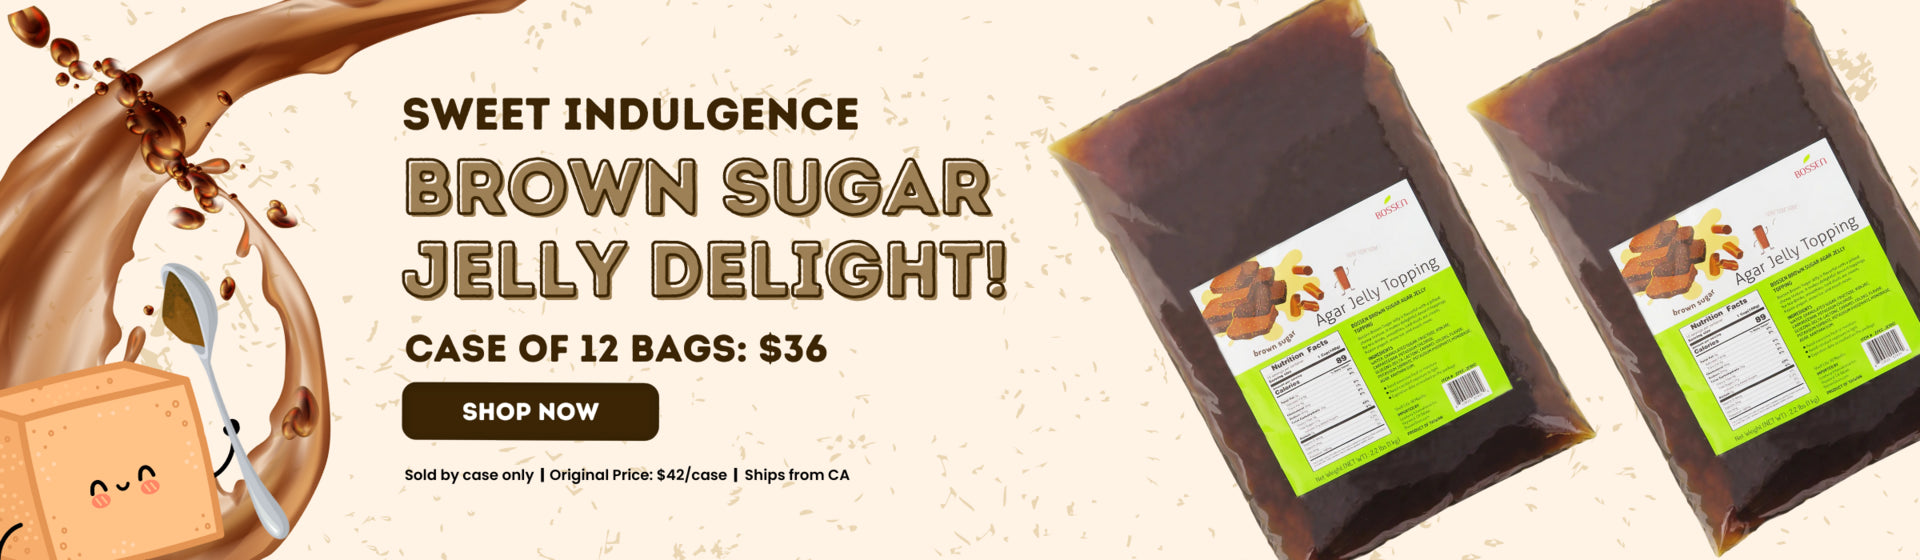 Sweet Indulgence. Brown Sugar Jelly Delight! Case of 12 Bags: $36. Shop Now. Sold by case only. Original Price: $42/case. Ships from CA